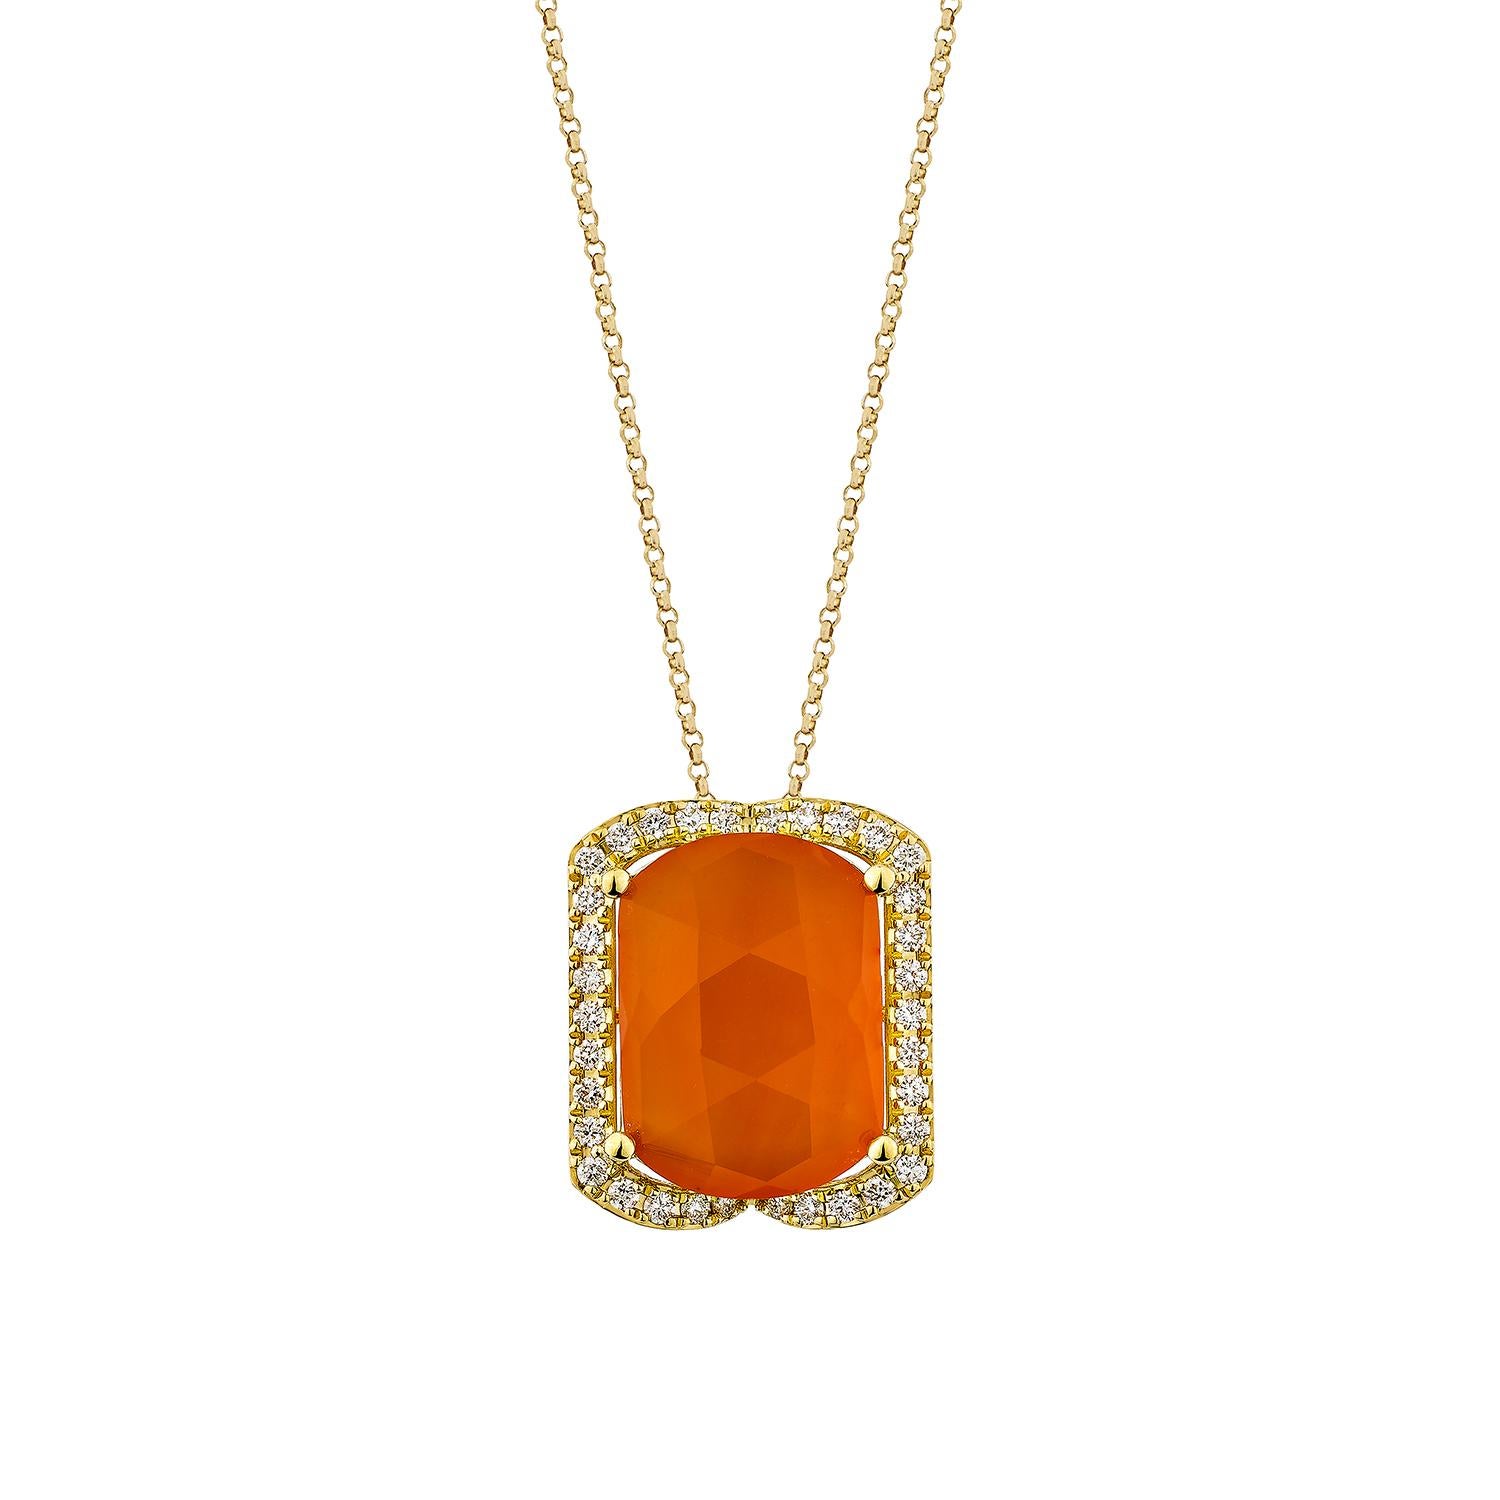 Sunita Nahata's latest collection is the 2024 Jewelry Sets. Gemstones in each set include citrine, amethyst, carnelian, Swiss blue topaz, and London blue topaz. These sets are eternal emblems of wealth, elegance, and individual flair. These sets are